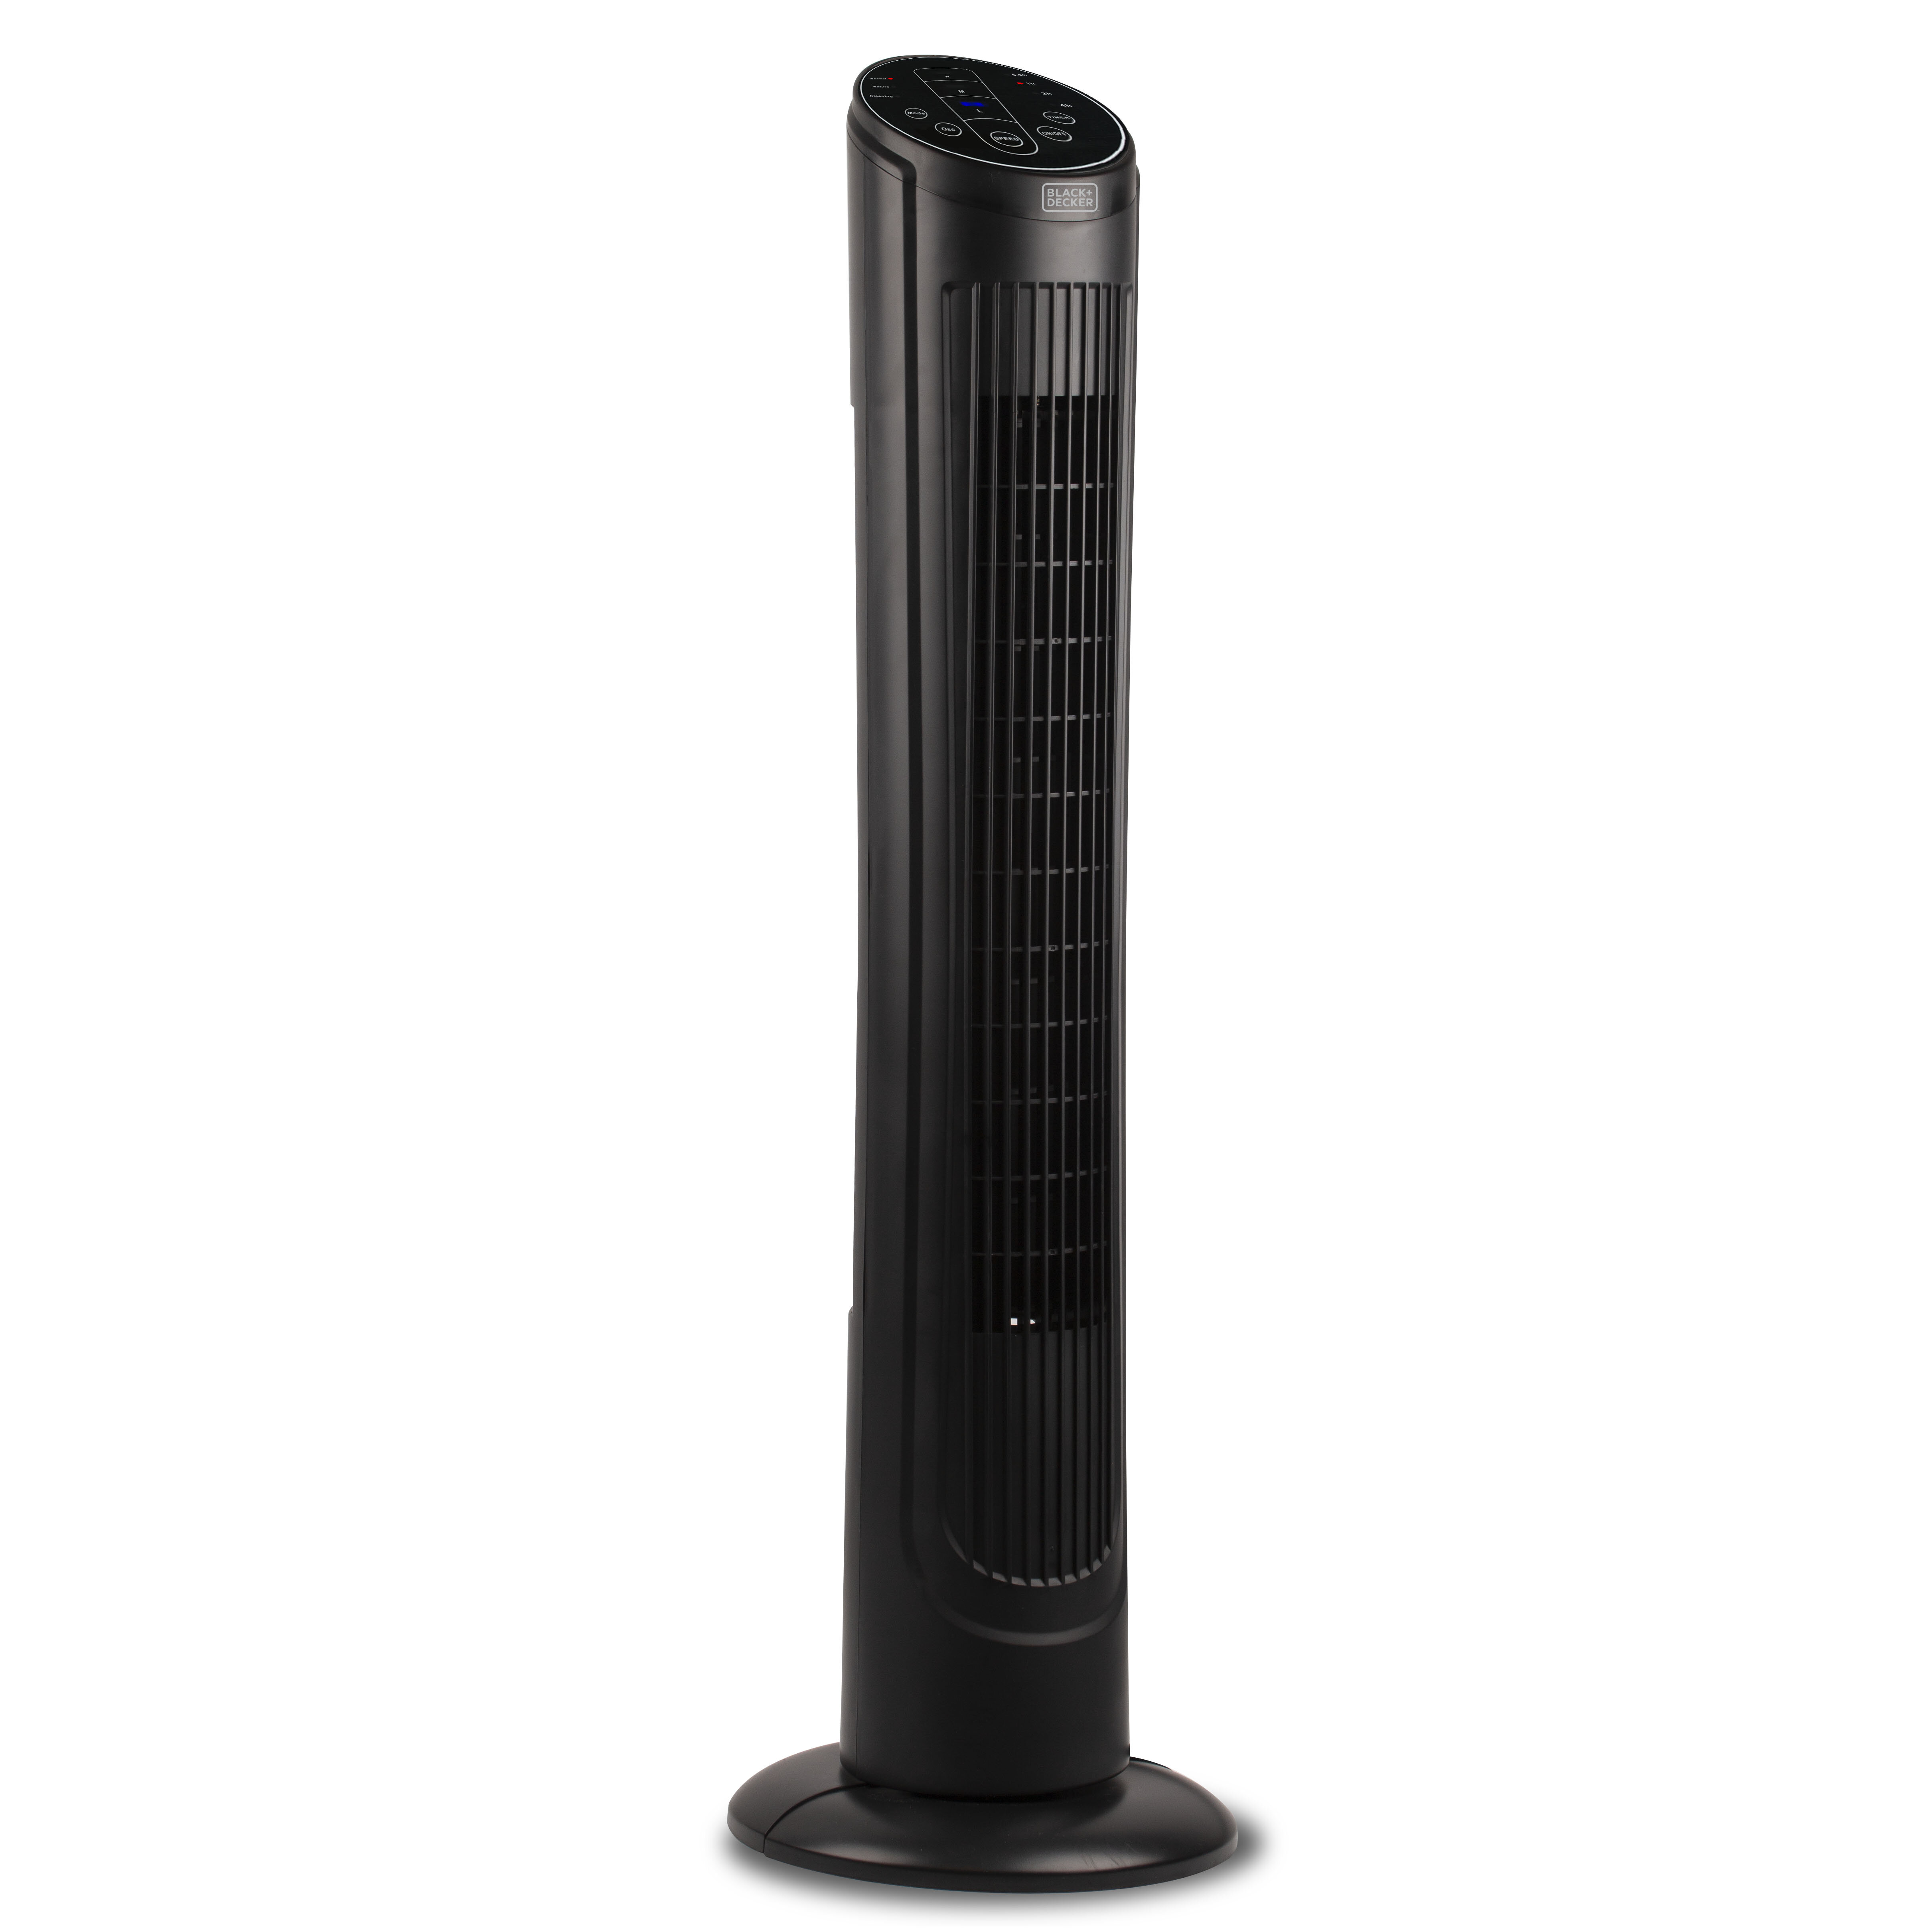 Black+decker 46-Inch Oscillating Tower Fan with Remote